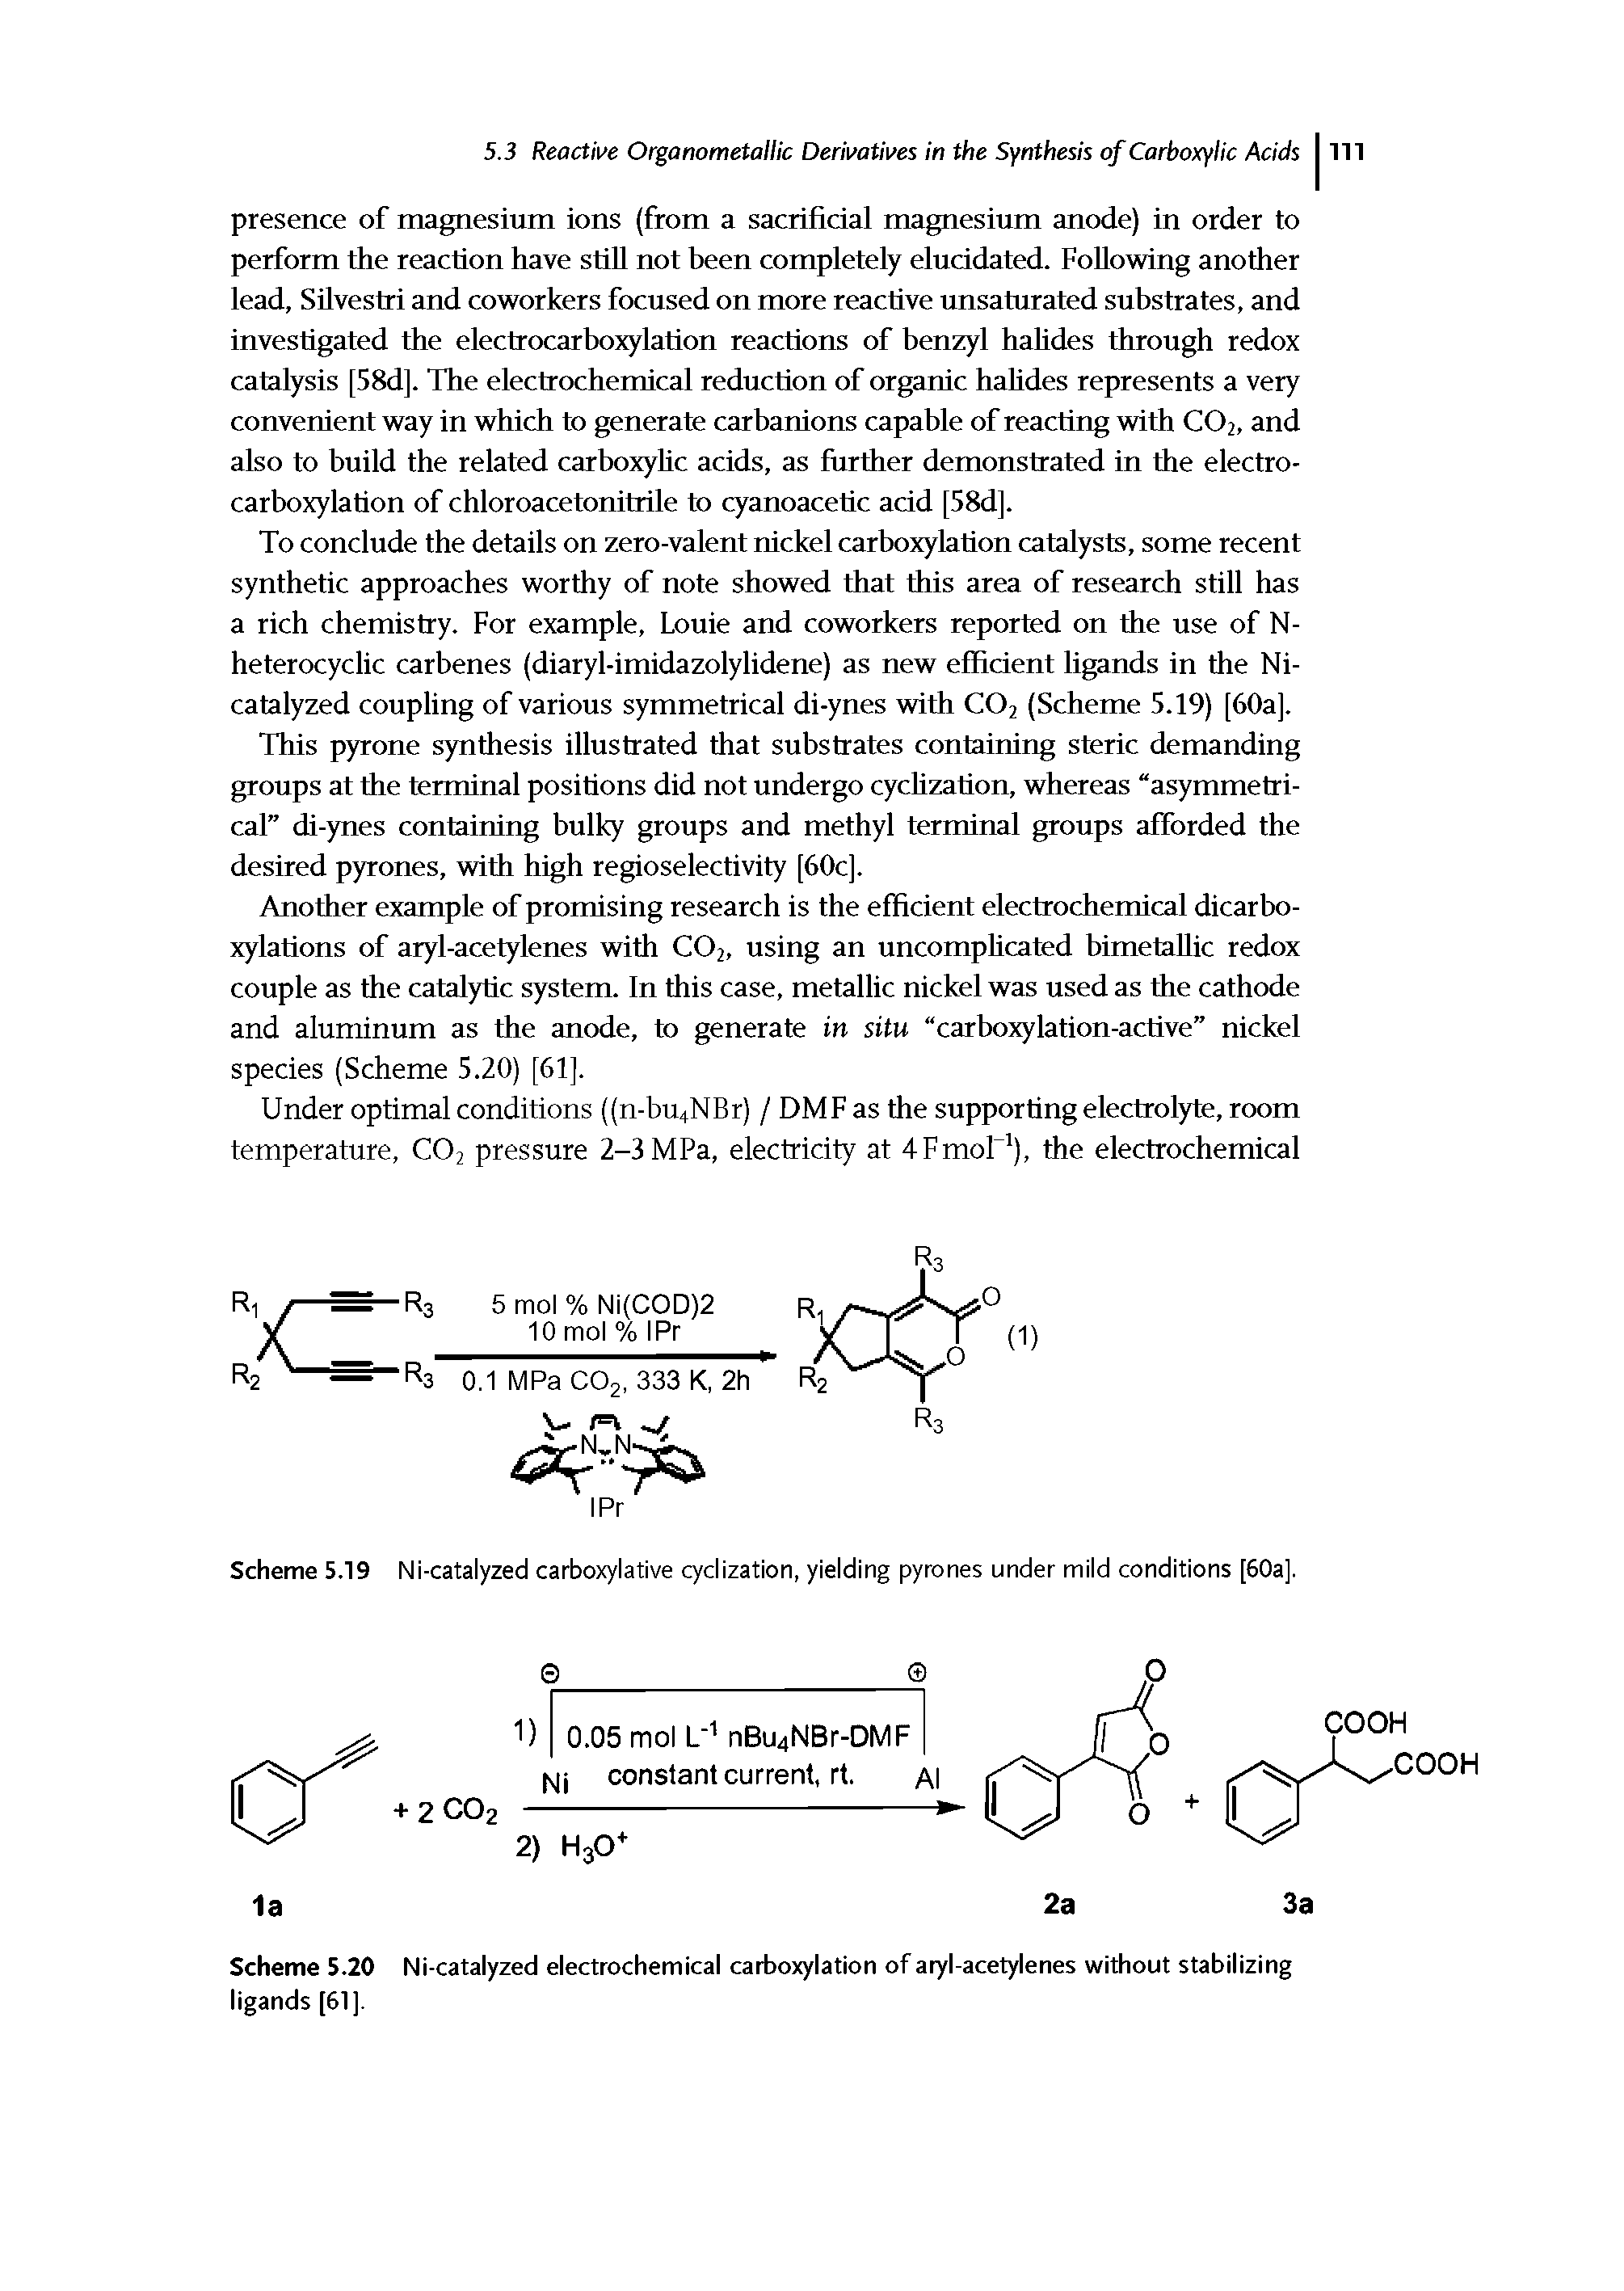 Scheme 5.20 Ni-catalyzed electrochemical carboxylation of aryl-acetylenes without stabilizing ligands [61].